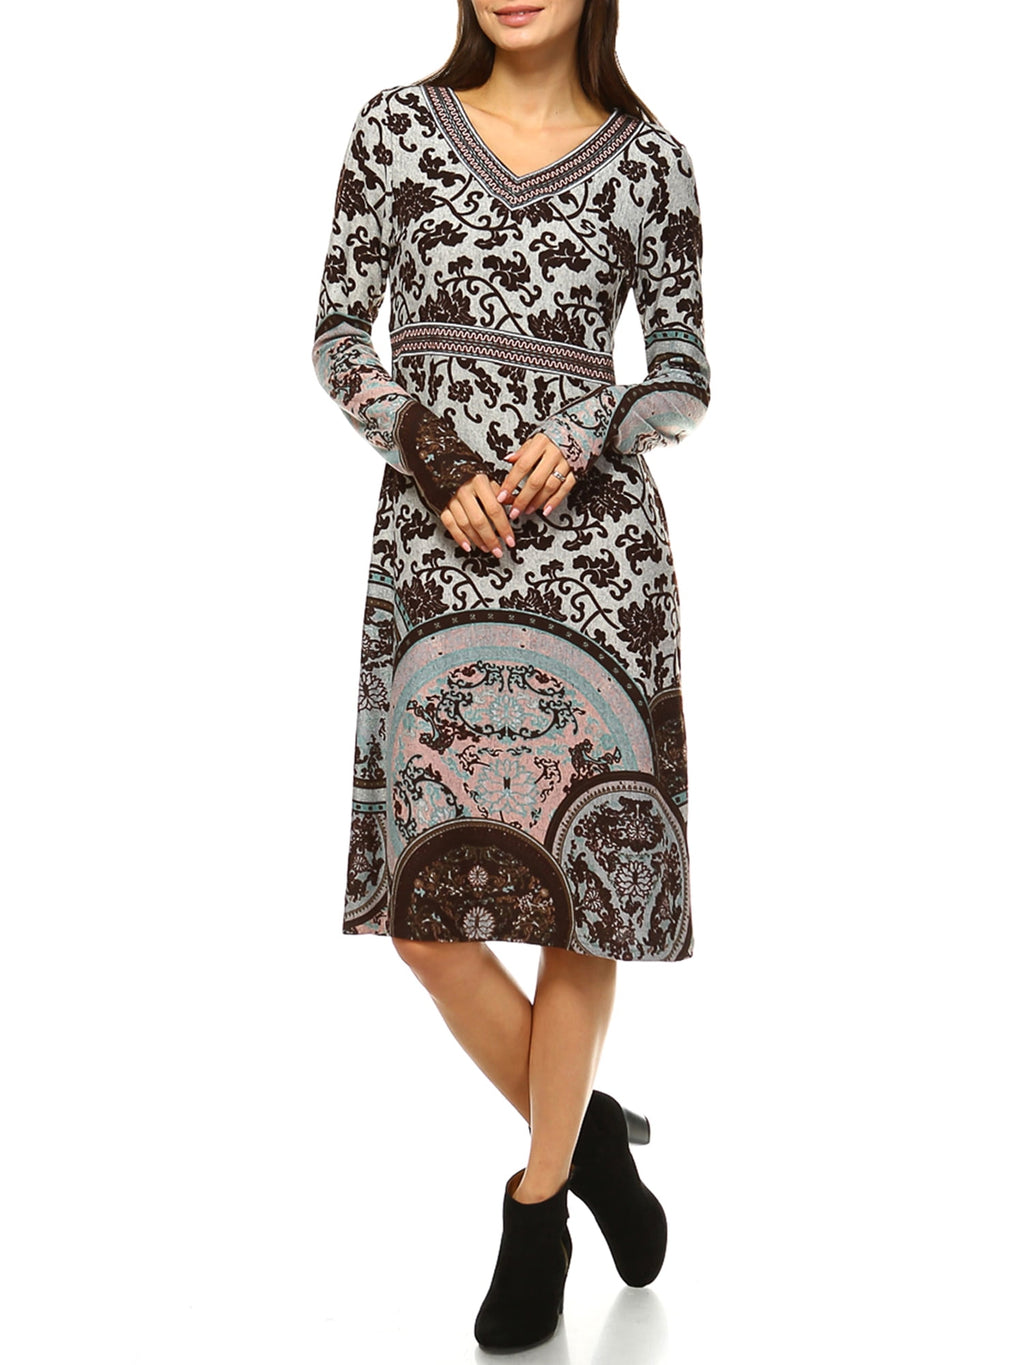 Women's Naarah Embroidered Sweater Dress - image 1 of 4